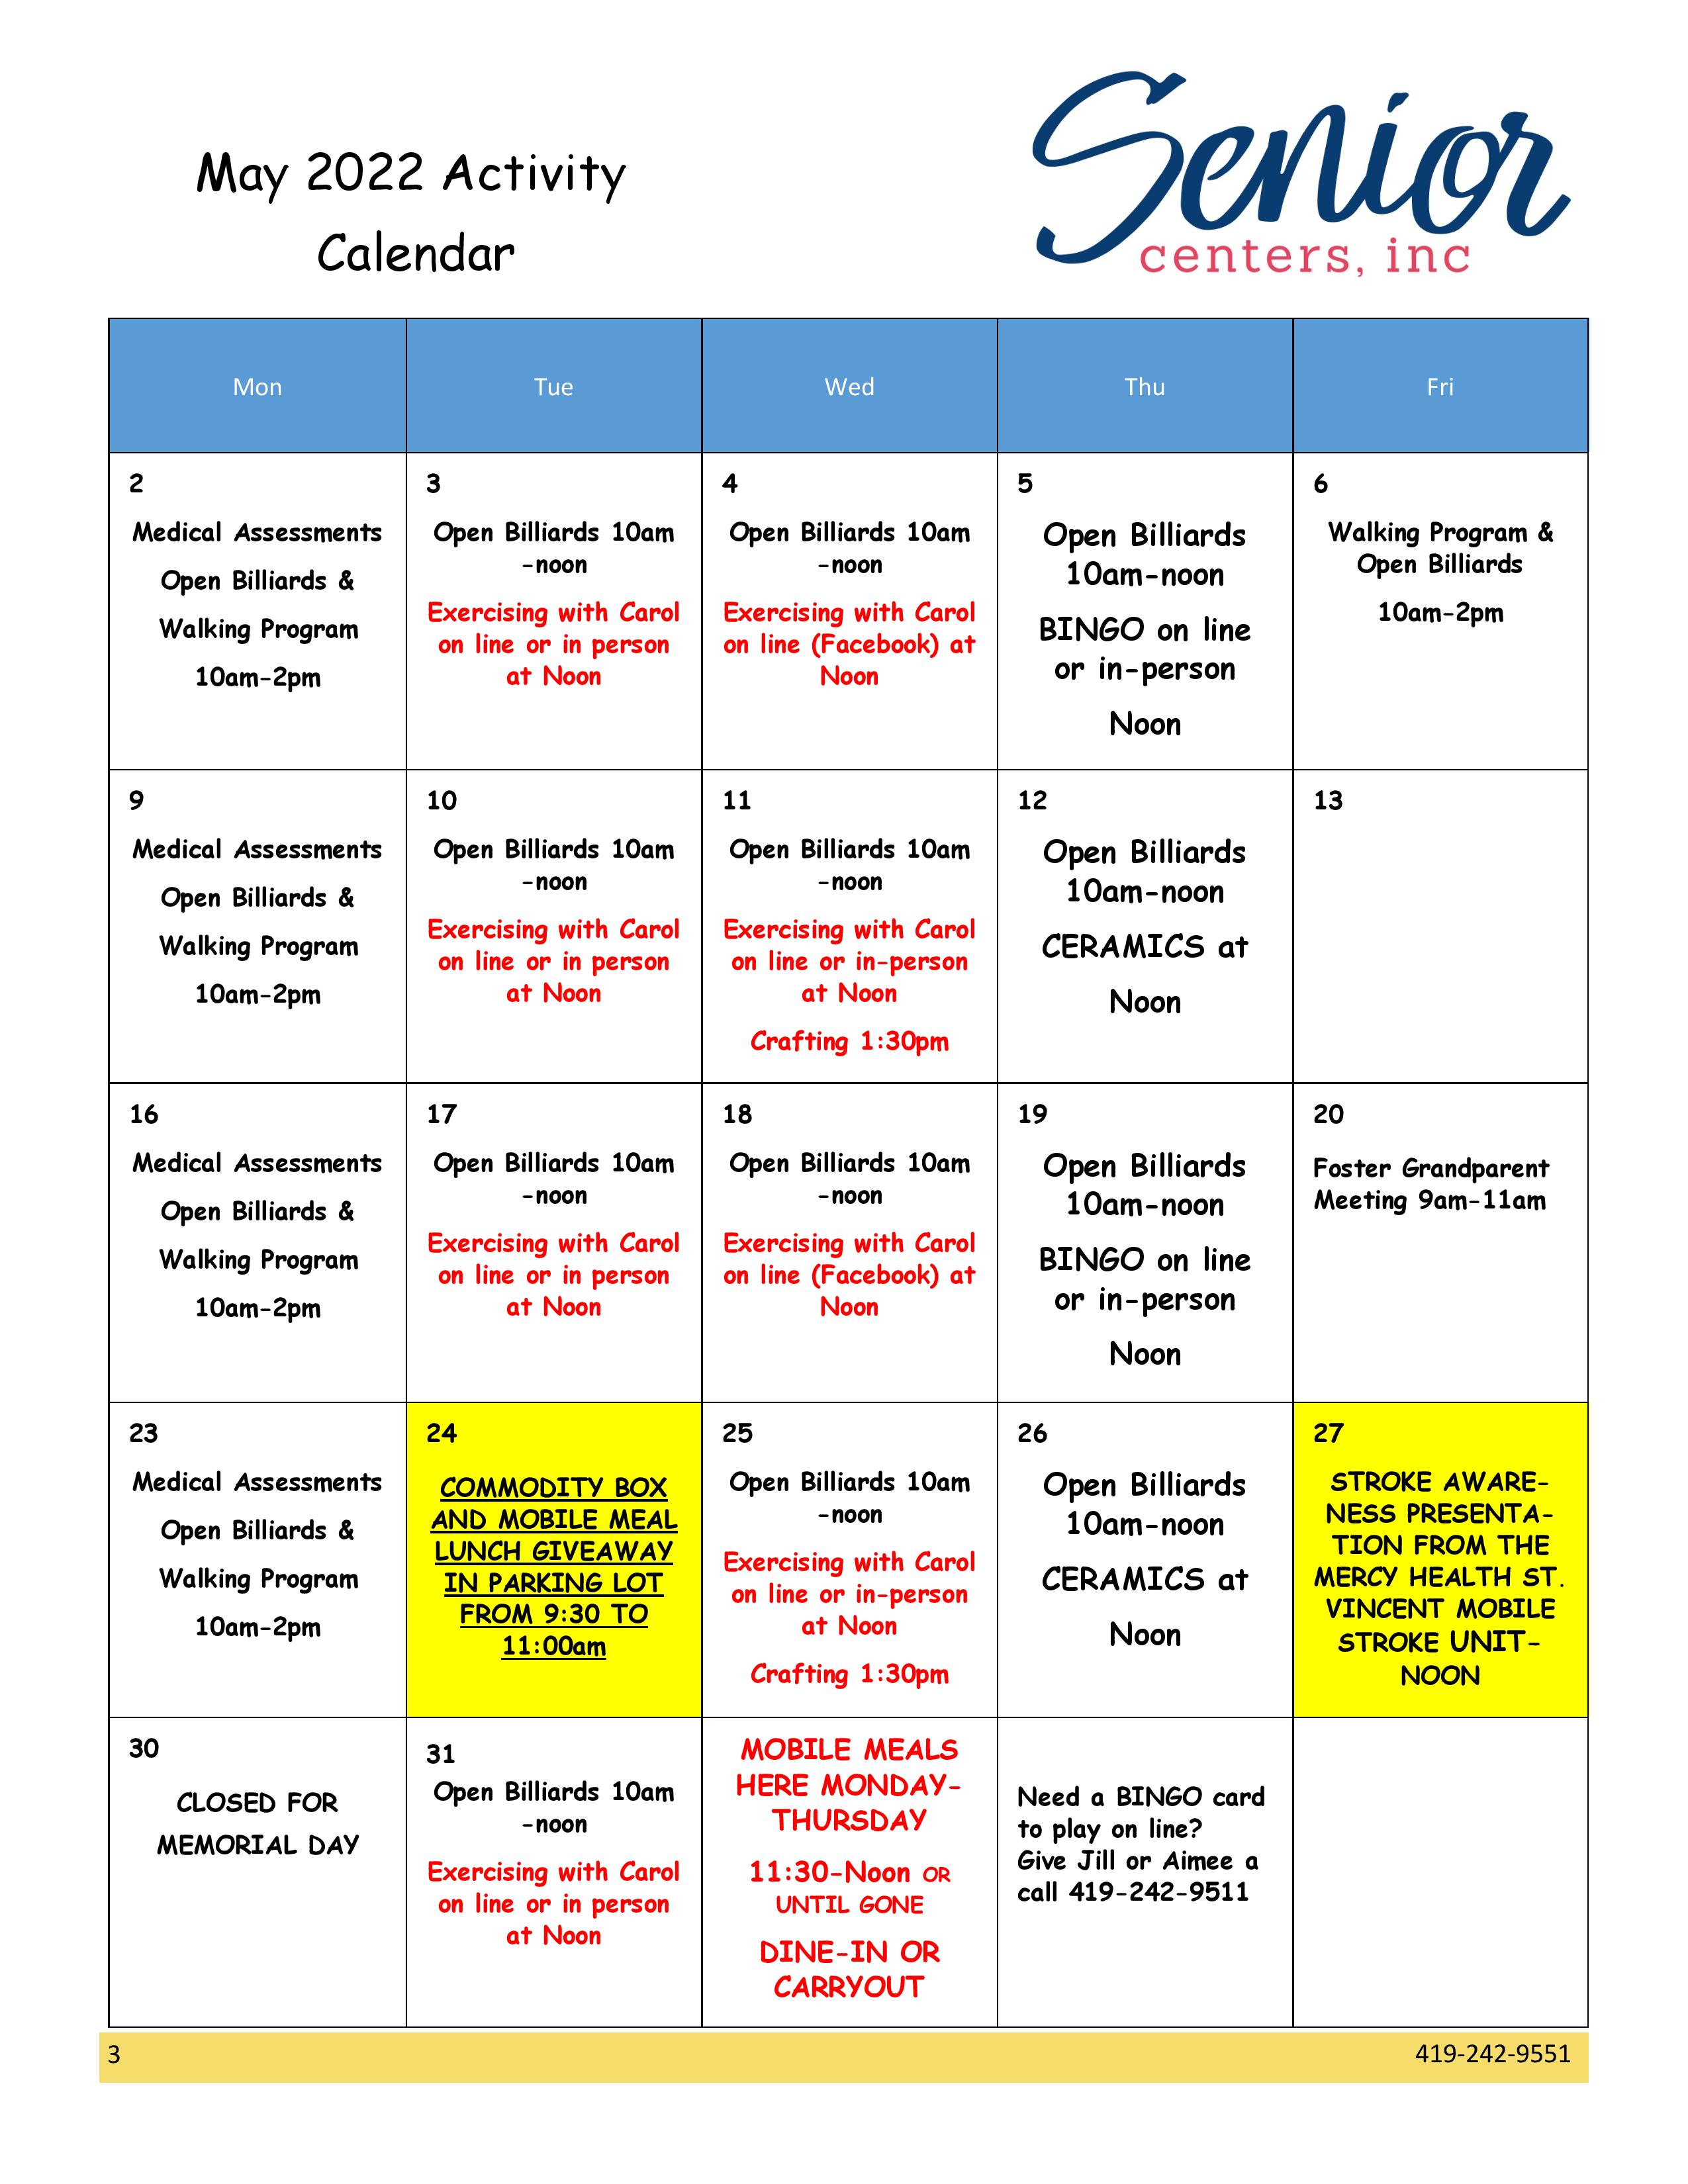 May 2022 Newsletter and Activity Calendar – Senior Centers, Inc.